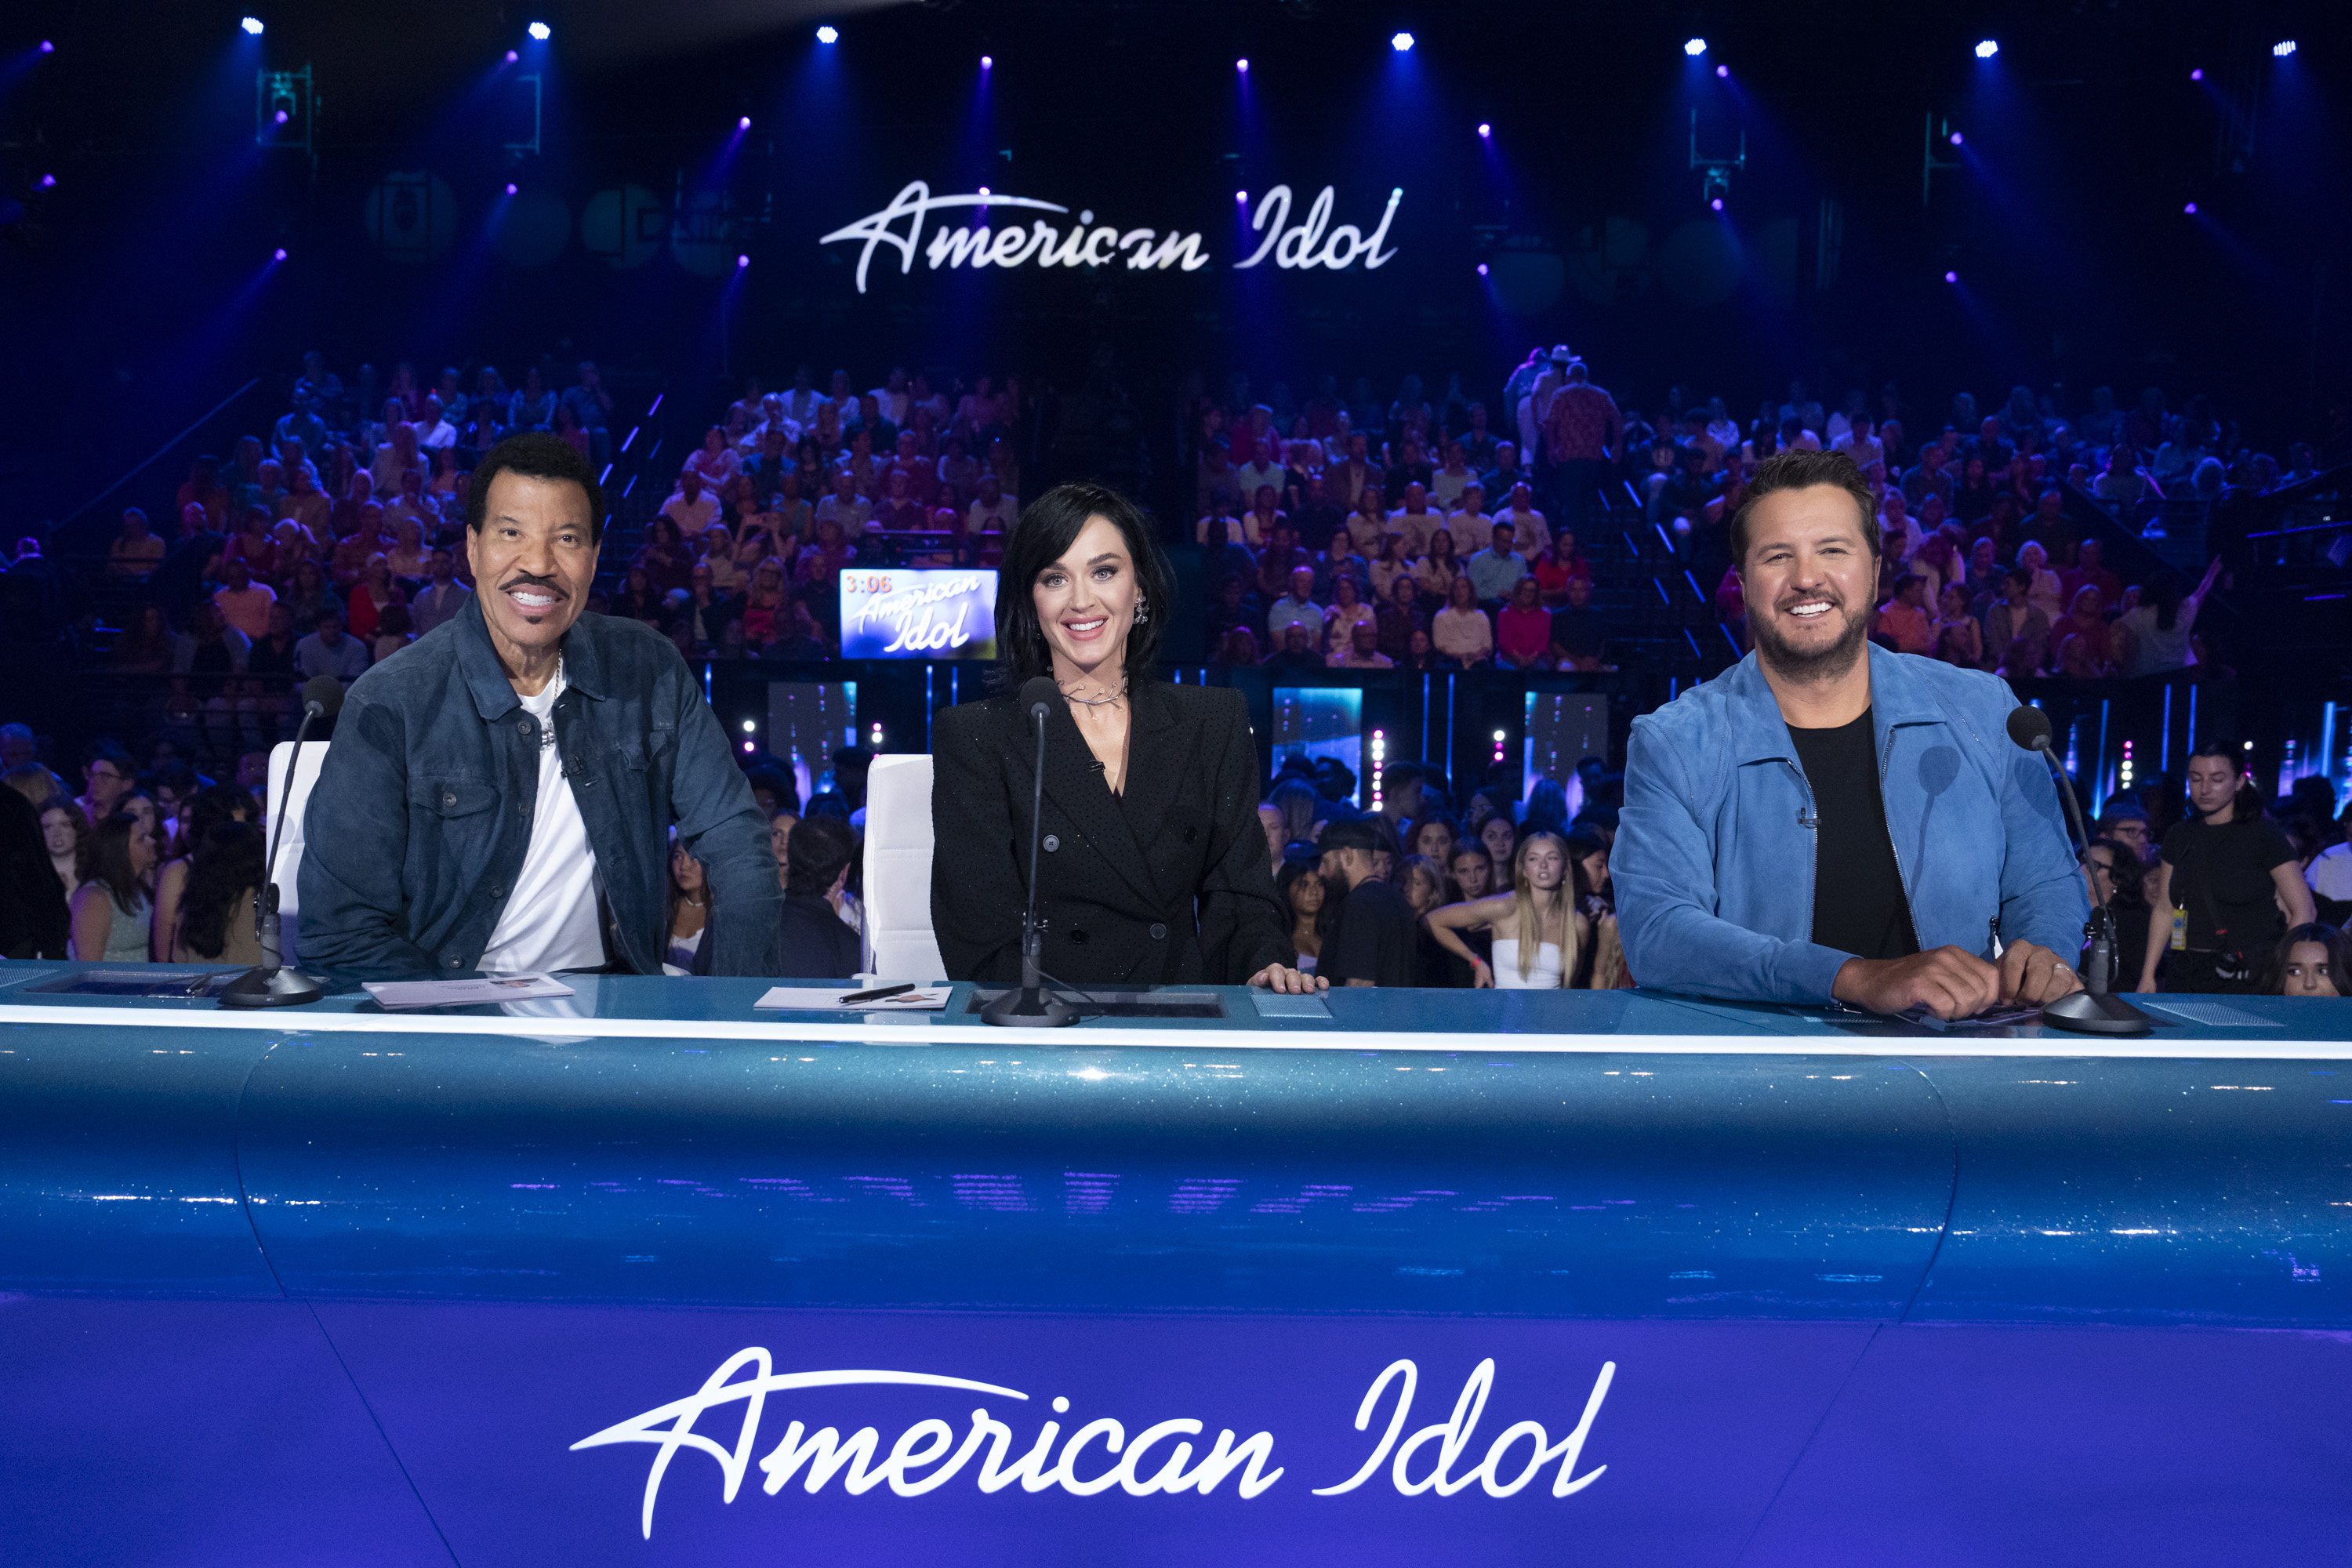 Katy Perry (center) is leaving American Idol after seven seasons working alongside Lionel Richie (left) and Luke Bryan (right) at the judges table, as seen above